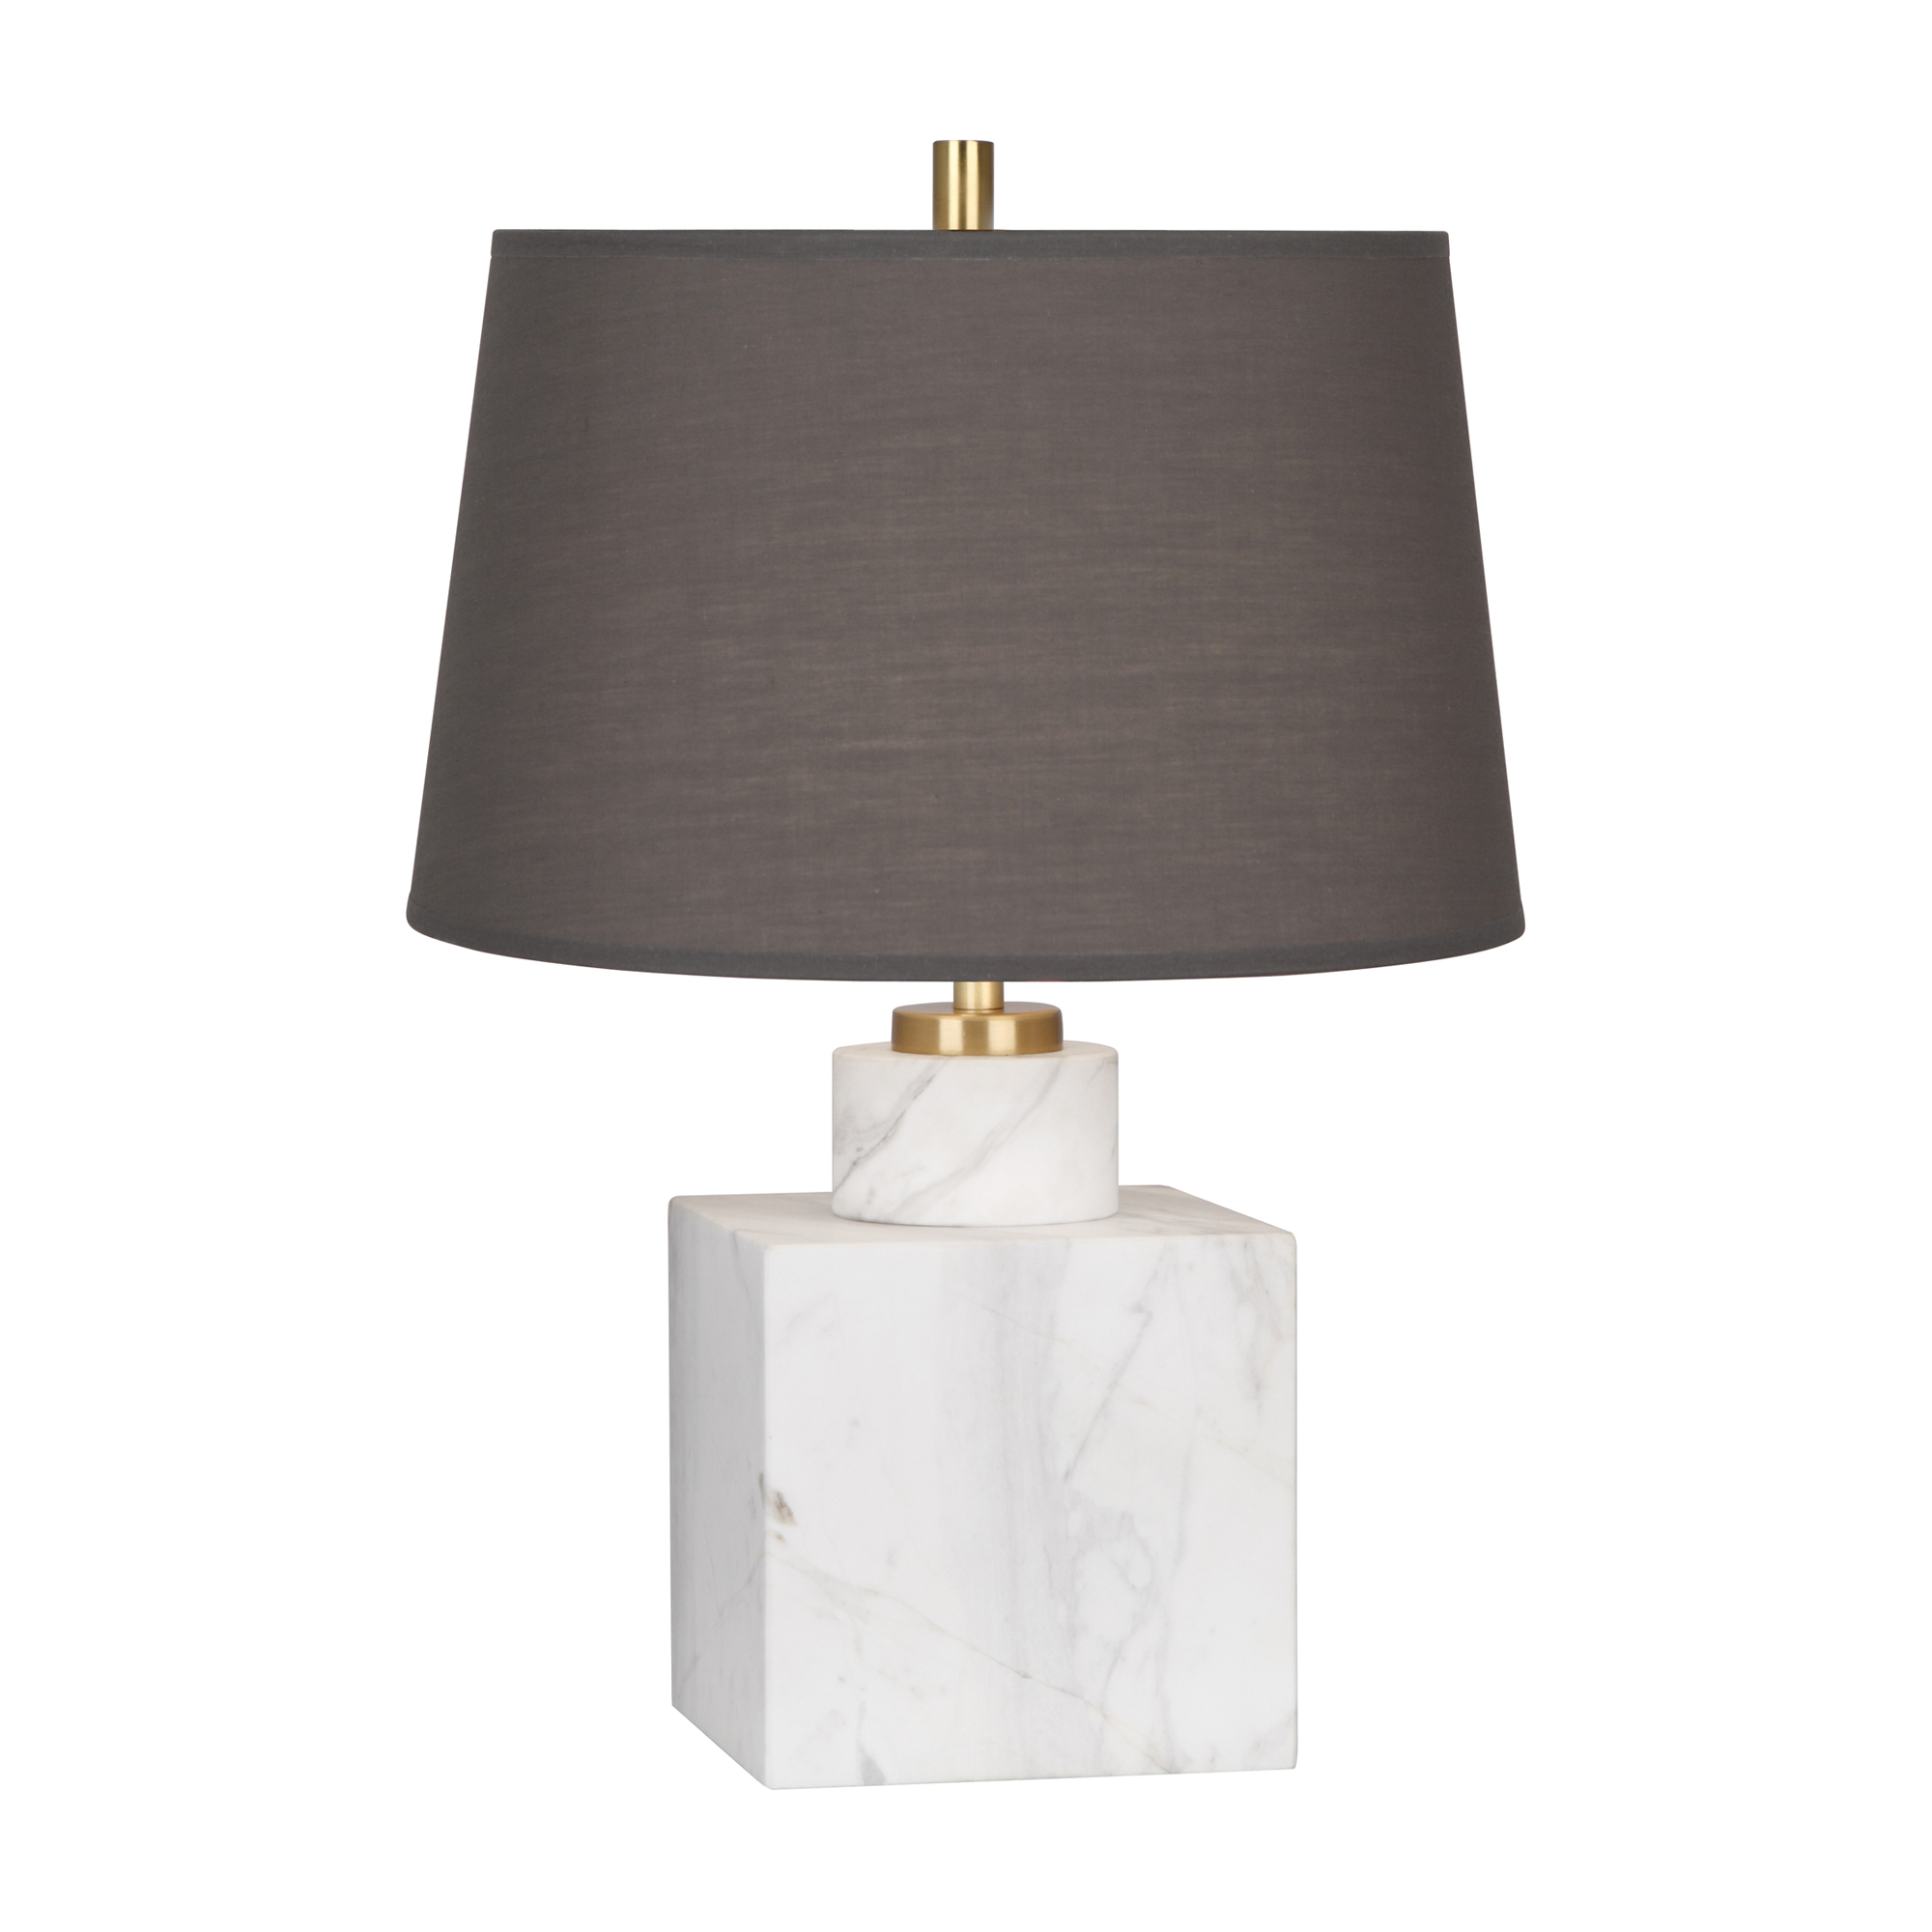 Jonathan Adler Canaan Accent Lamp Style #795X